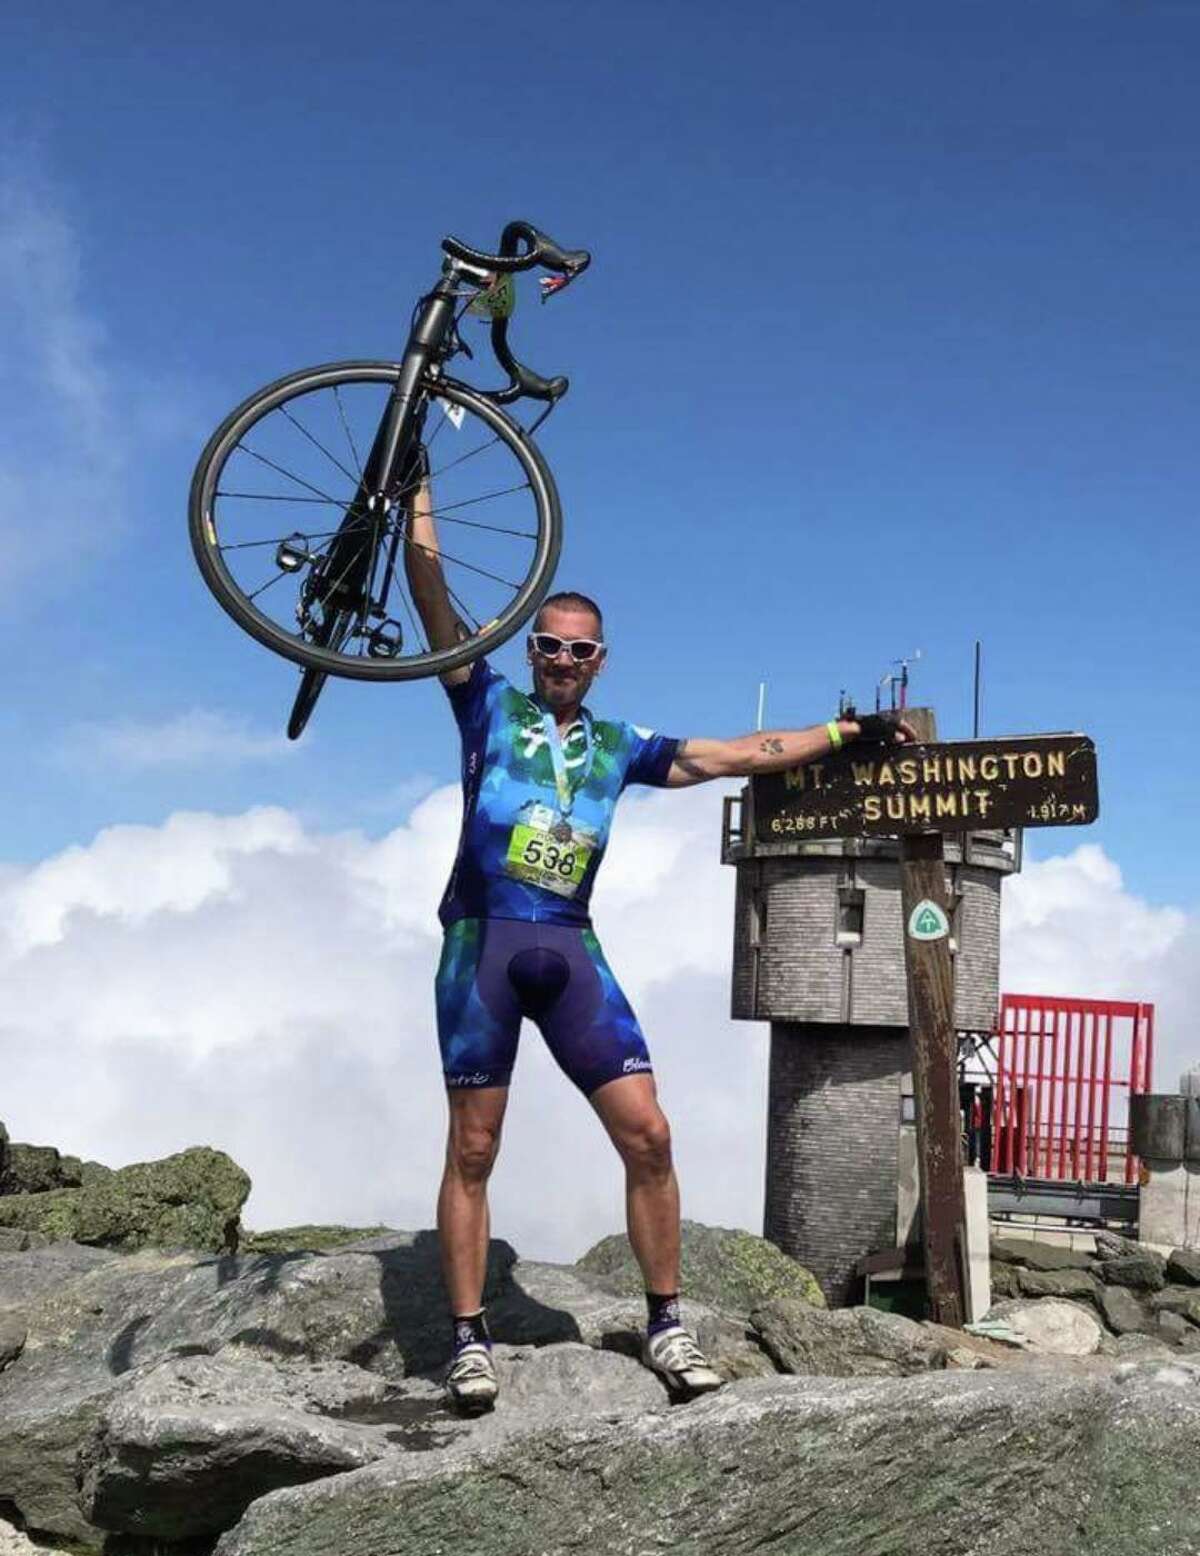 Robert Hurd, owner of Snap Fitness Portland, rode to the top of Mt. Washington in New Hampshire in August 2017. It was the first time he did so after he was hit by a car in Middletown while cycling, causing great injury and trauma.